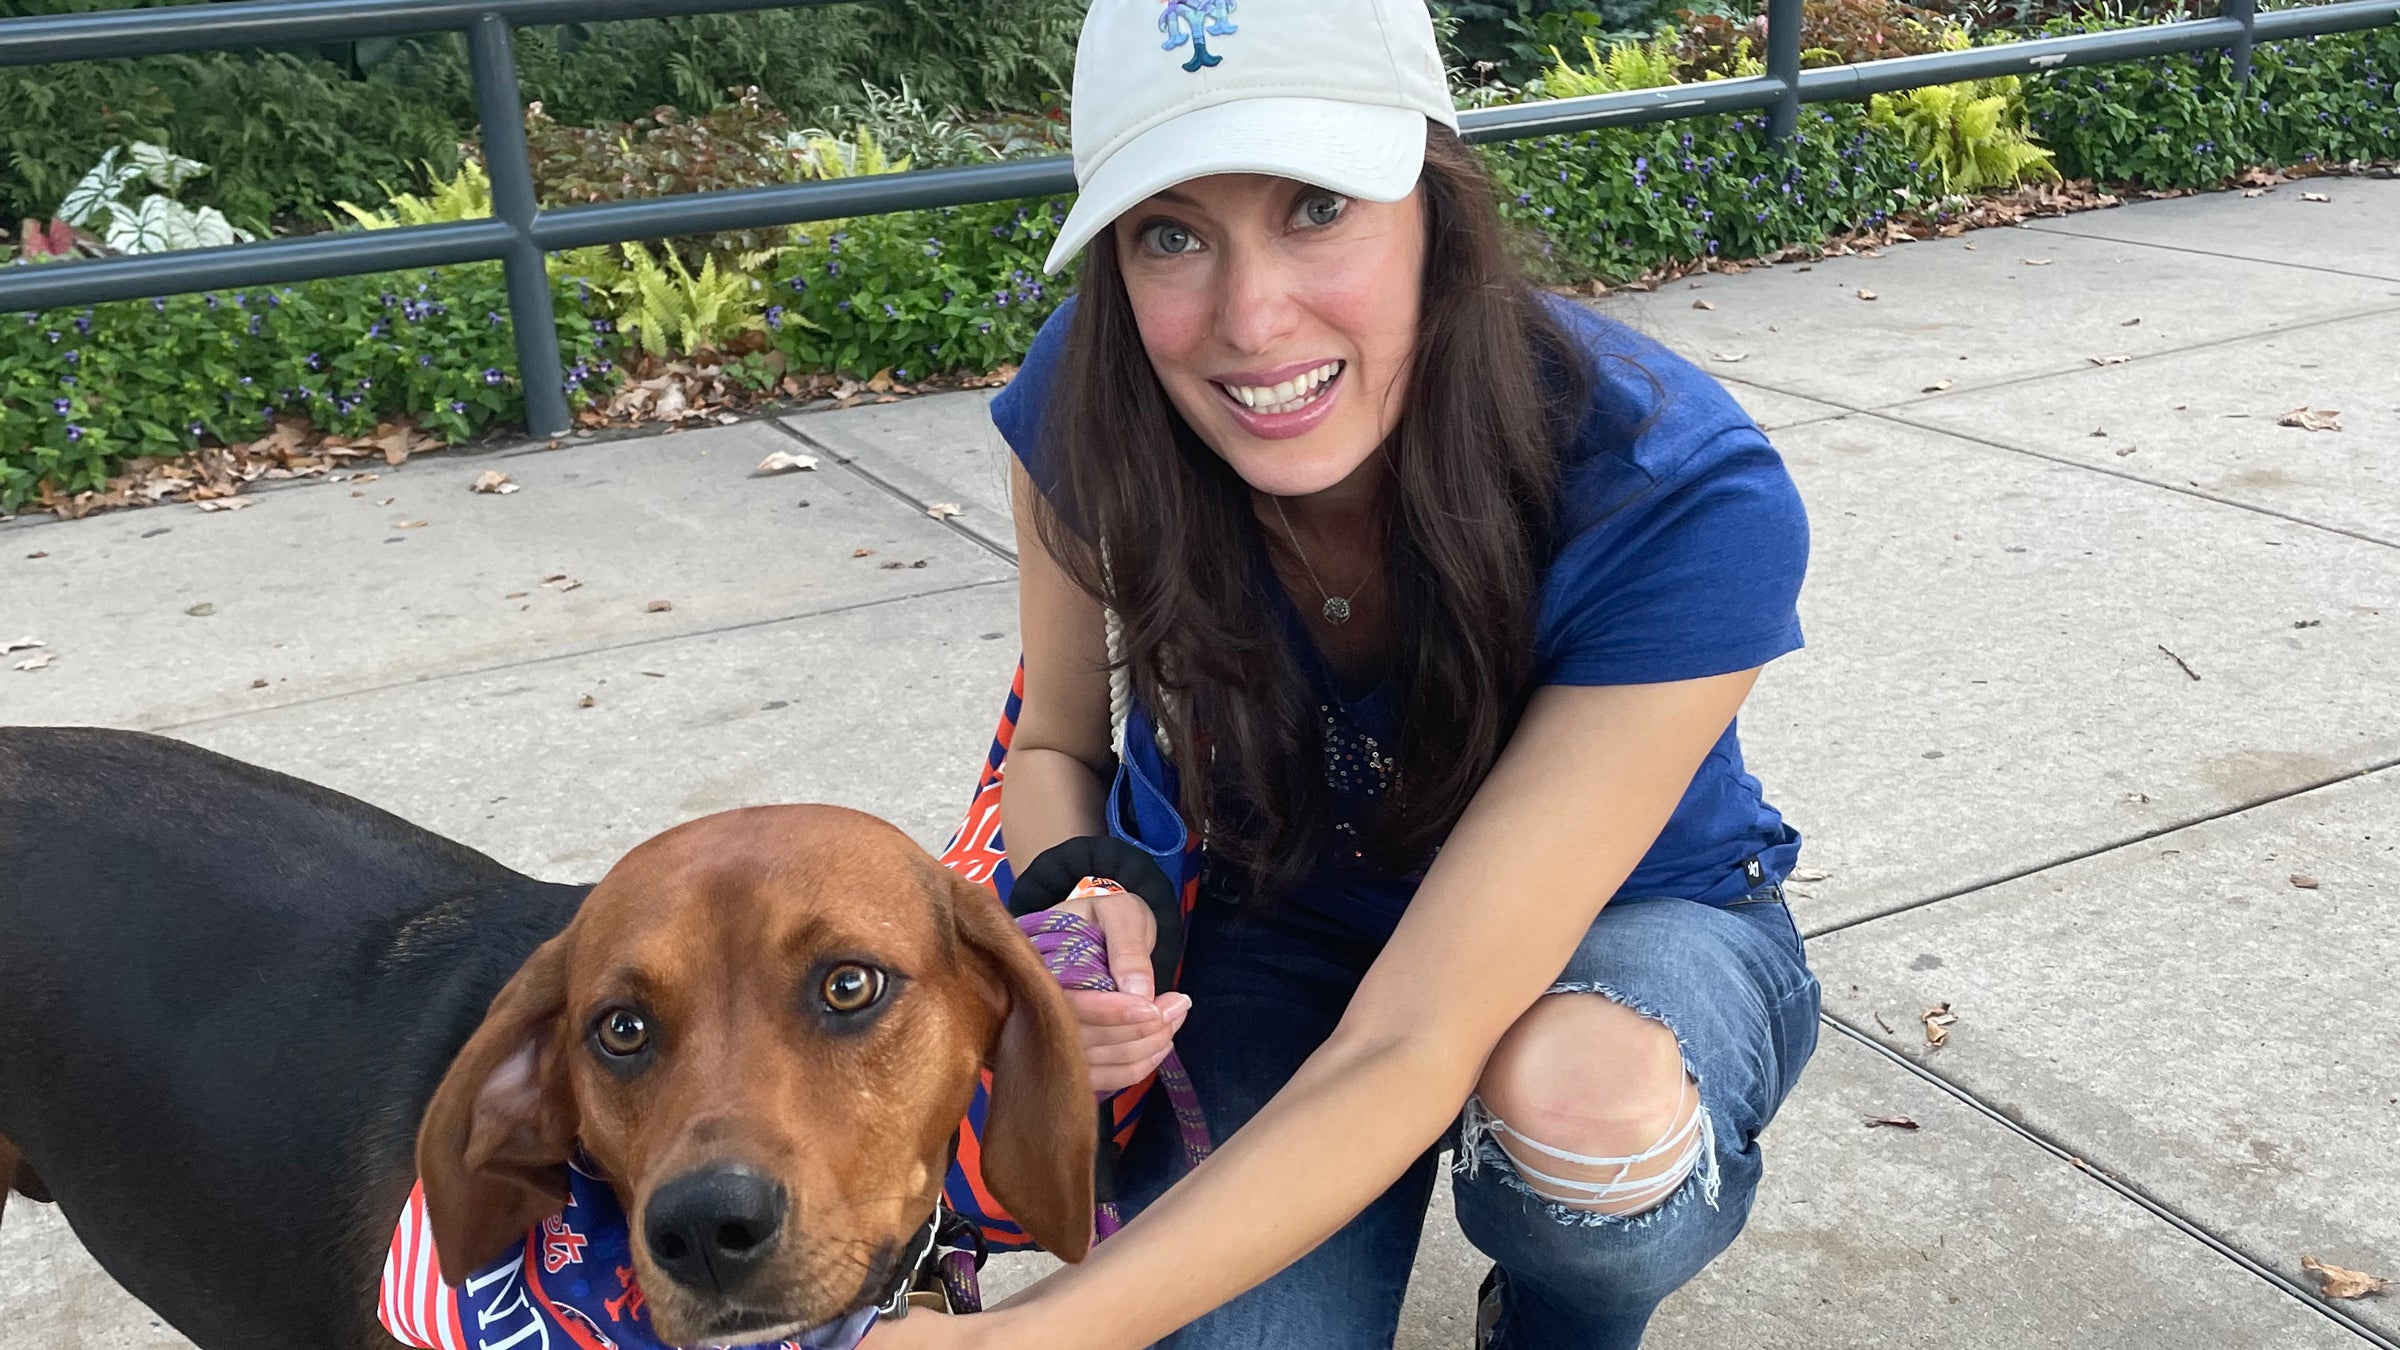 I fell in love with her': The story of the Jeff McNeil puppy